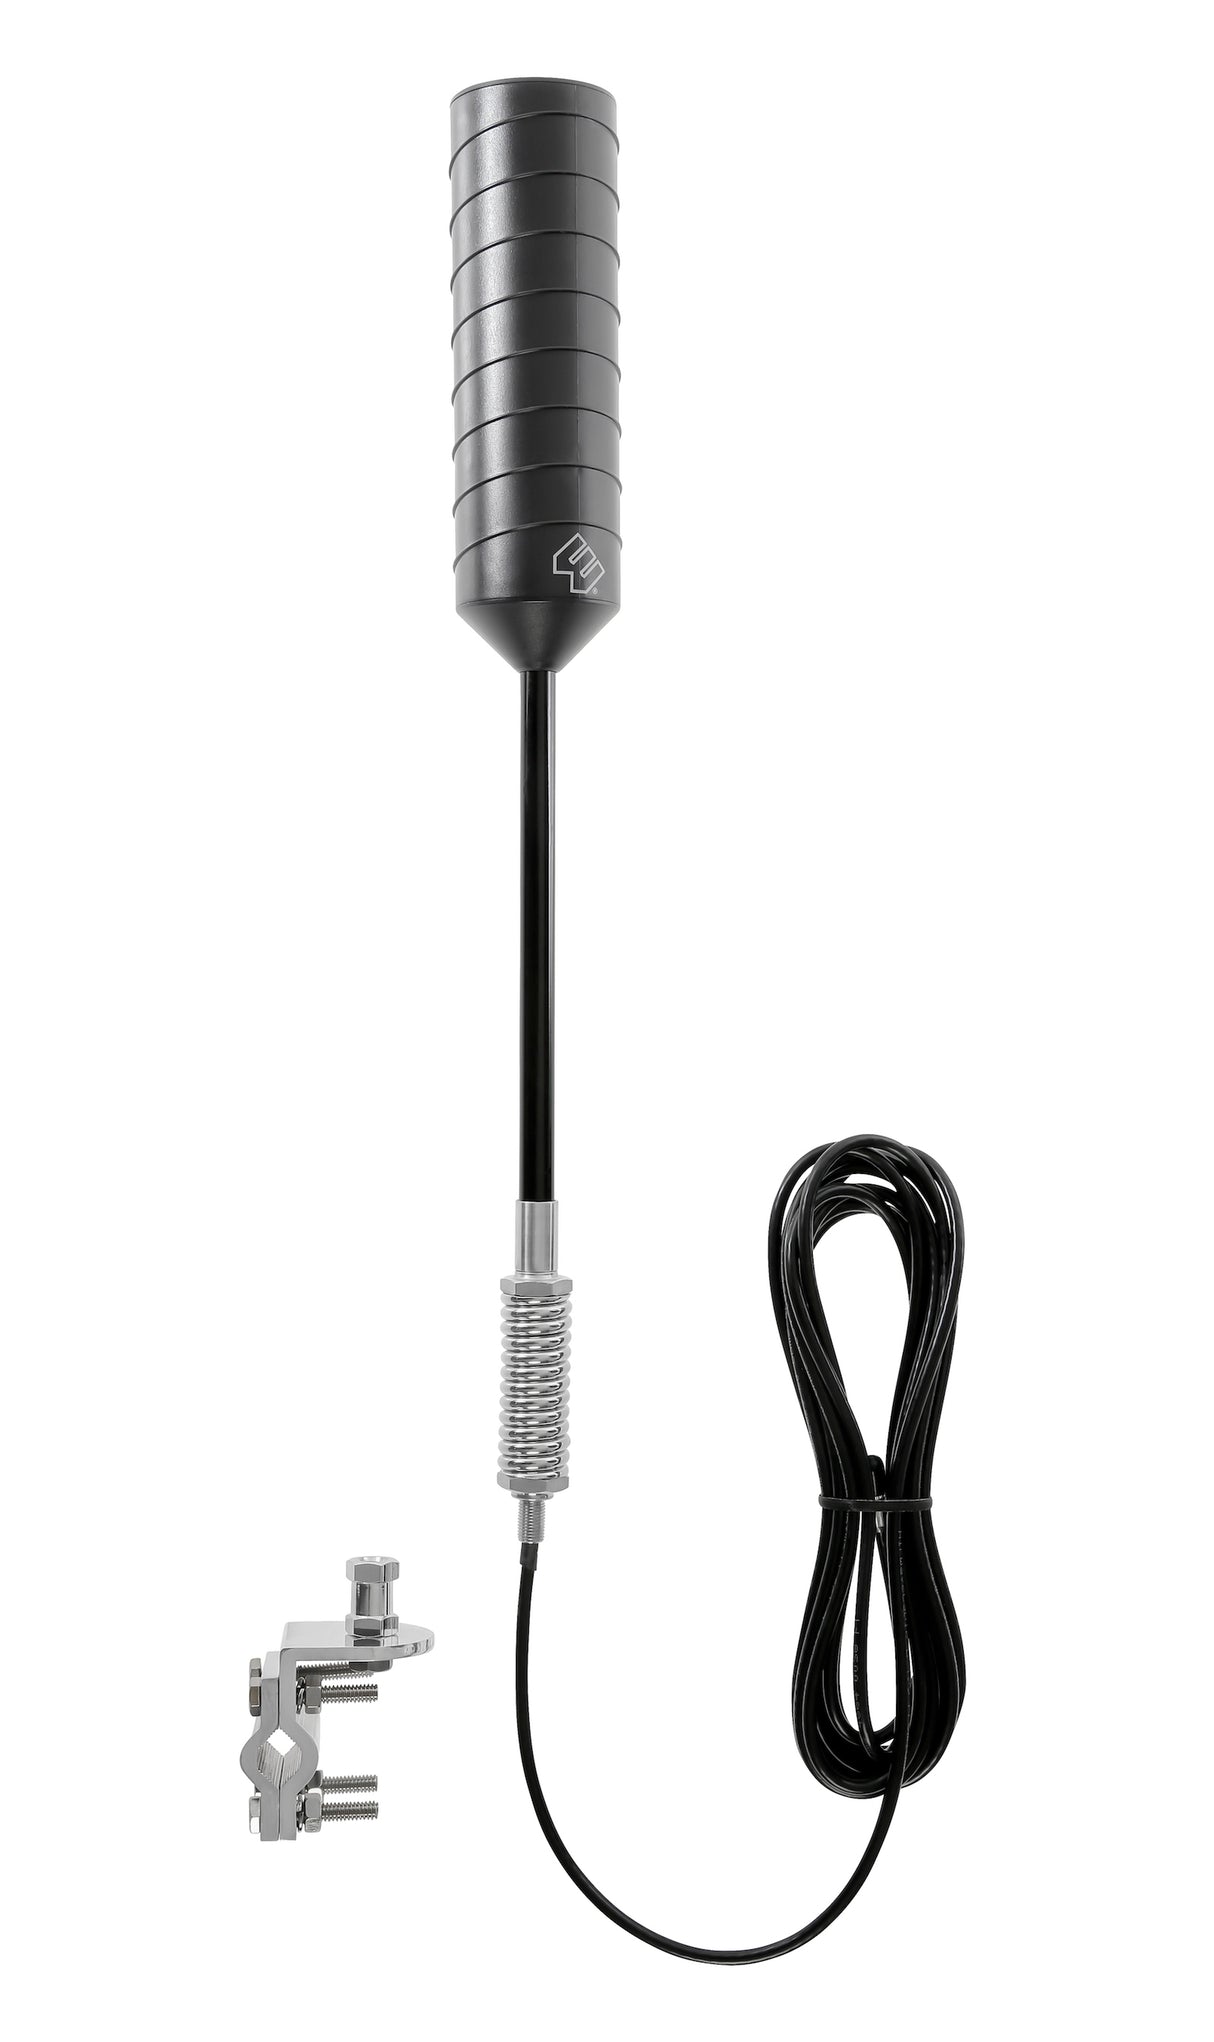 Drive Reach Extreme RV Signal Booster Kit - Spring Mount 4G Antenna